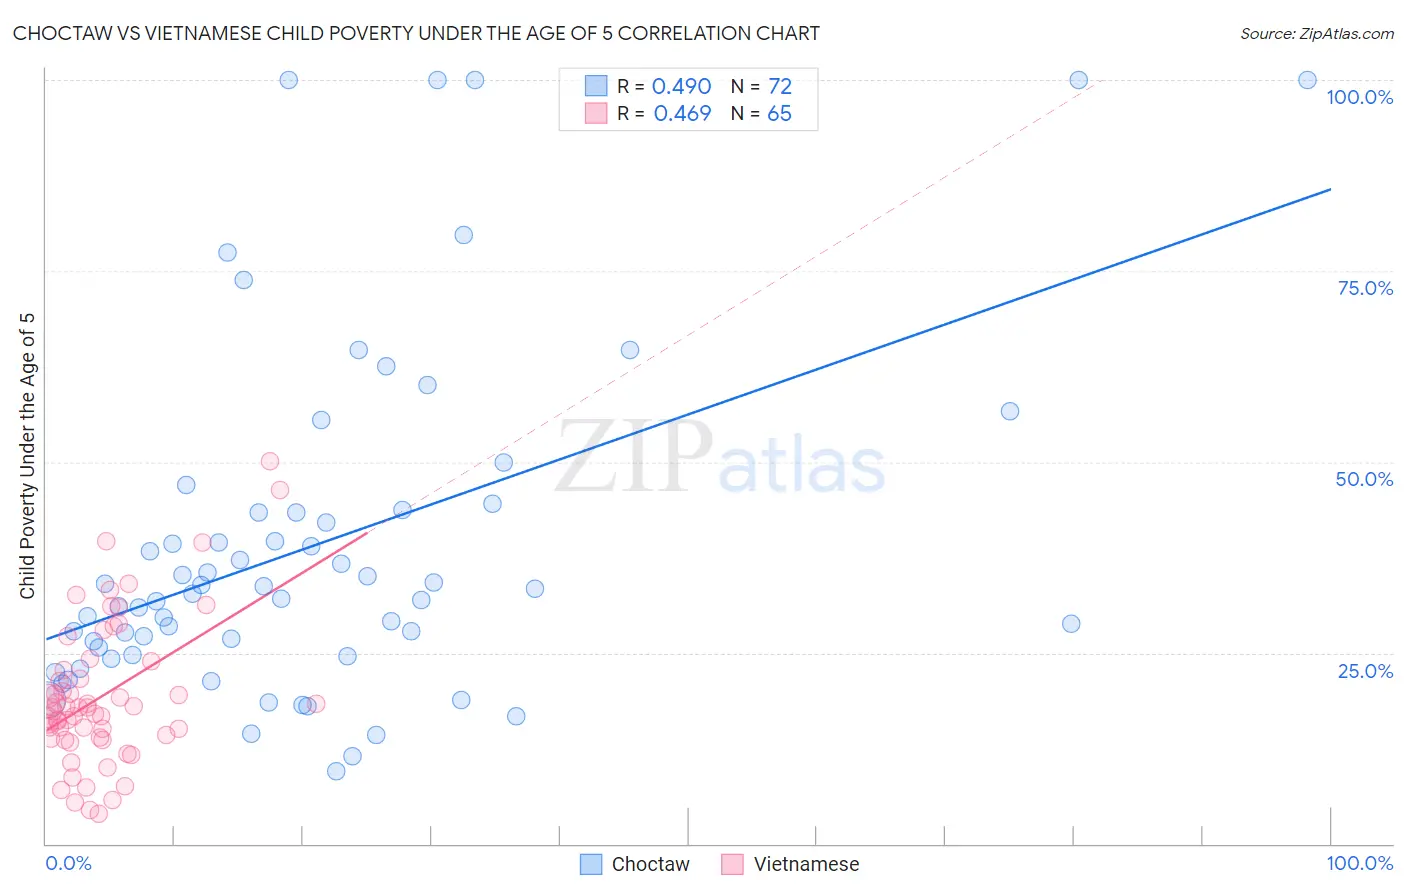 Choctaw vs Vietnamese Child Poverty Under the Age of 5